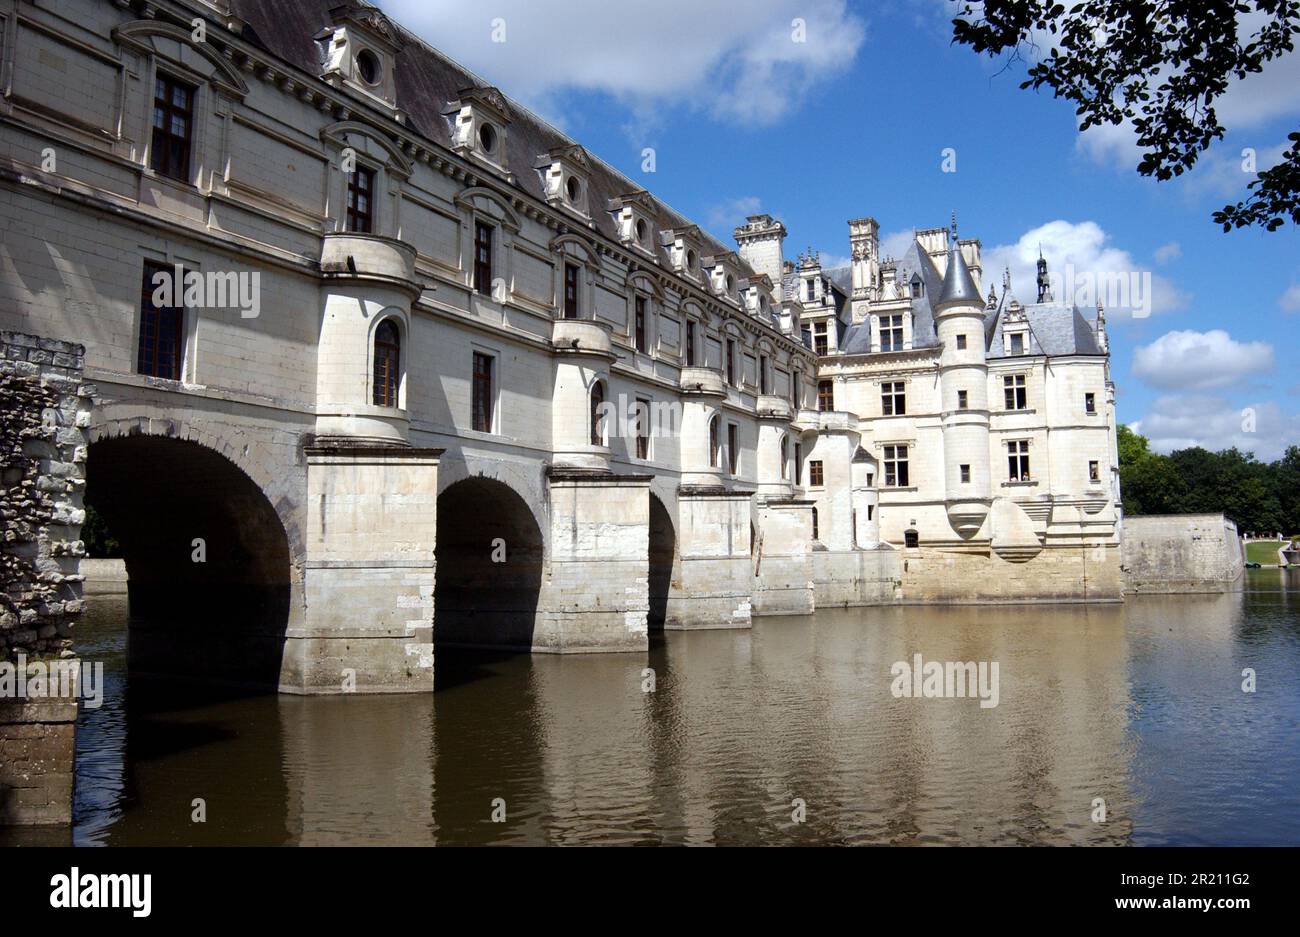 Photograph showing the exterior of Chateau de Chenonceau, a French chateau spanning the River Cher. Stock Photo